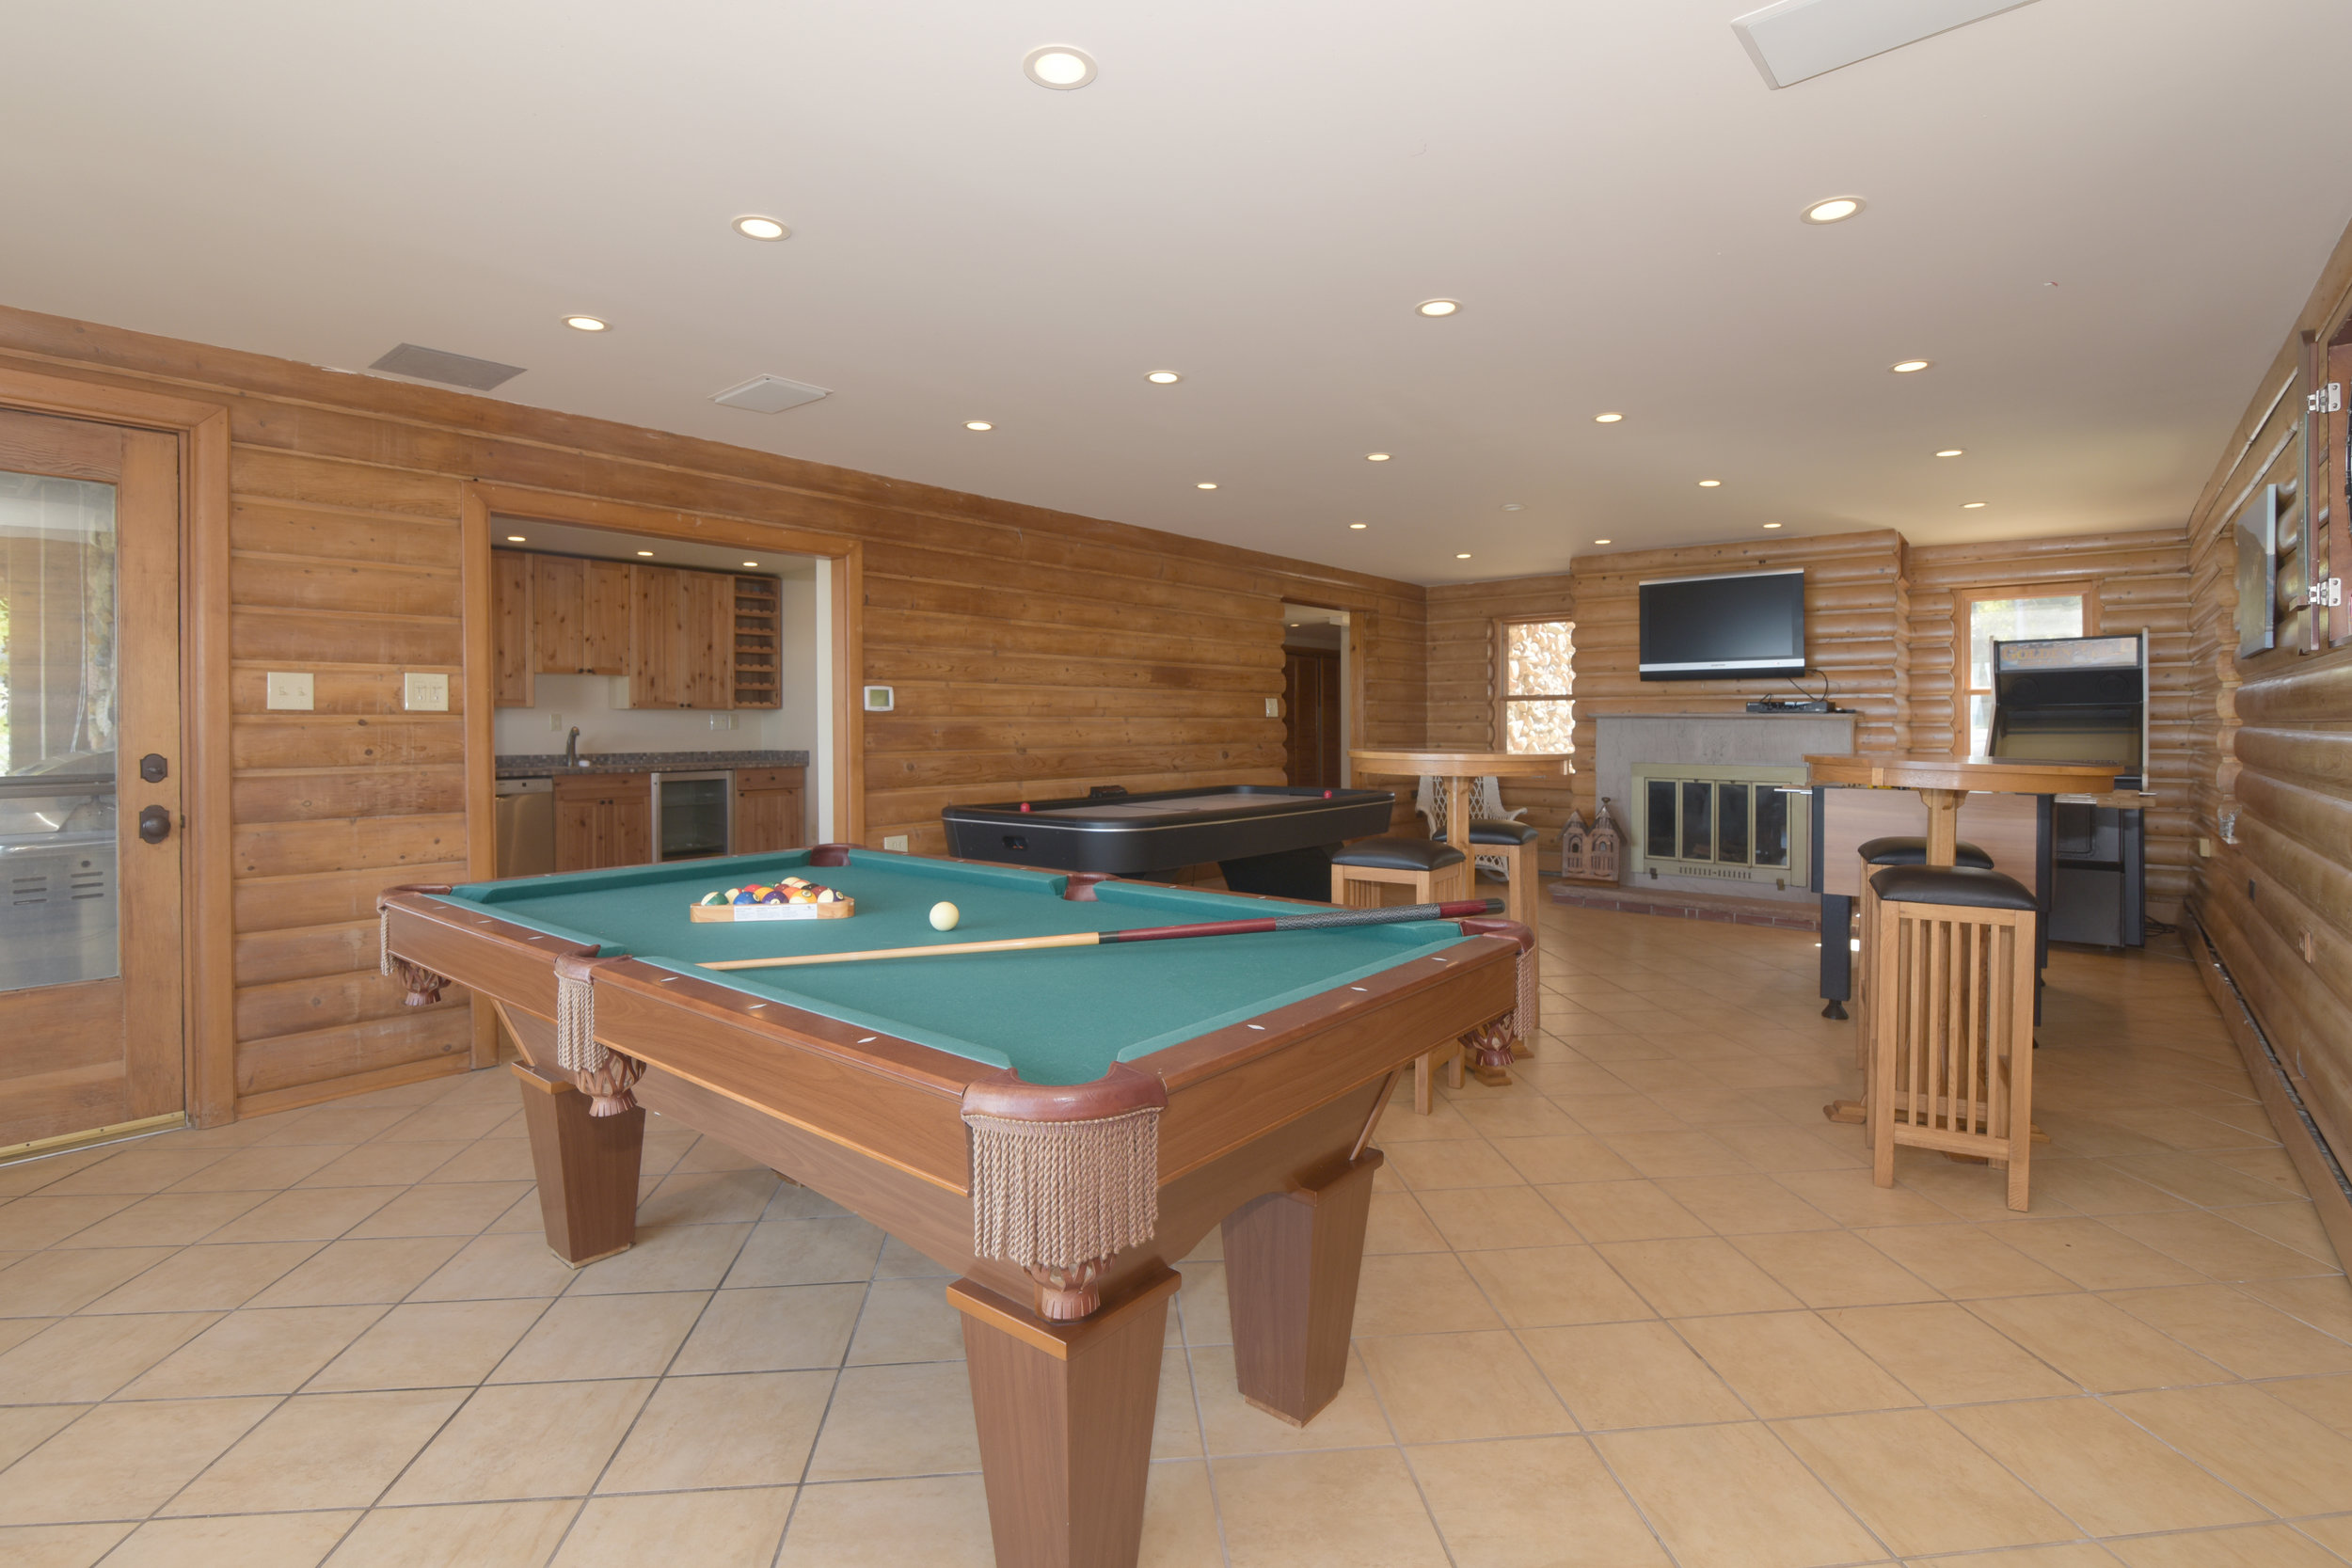  Game room at Lakefront property in Indiana Dunes.  